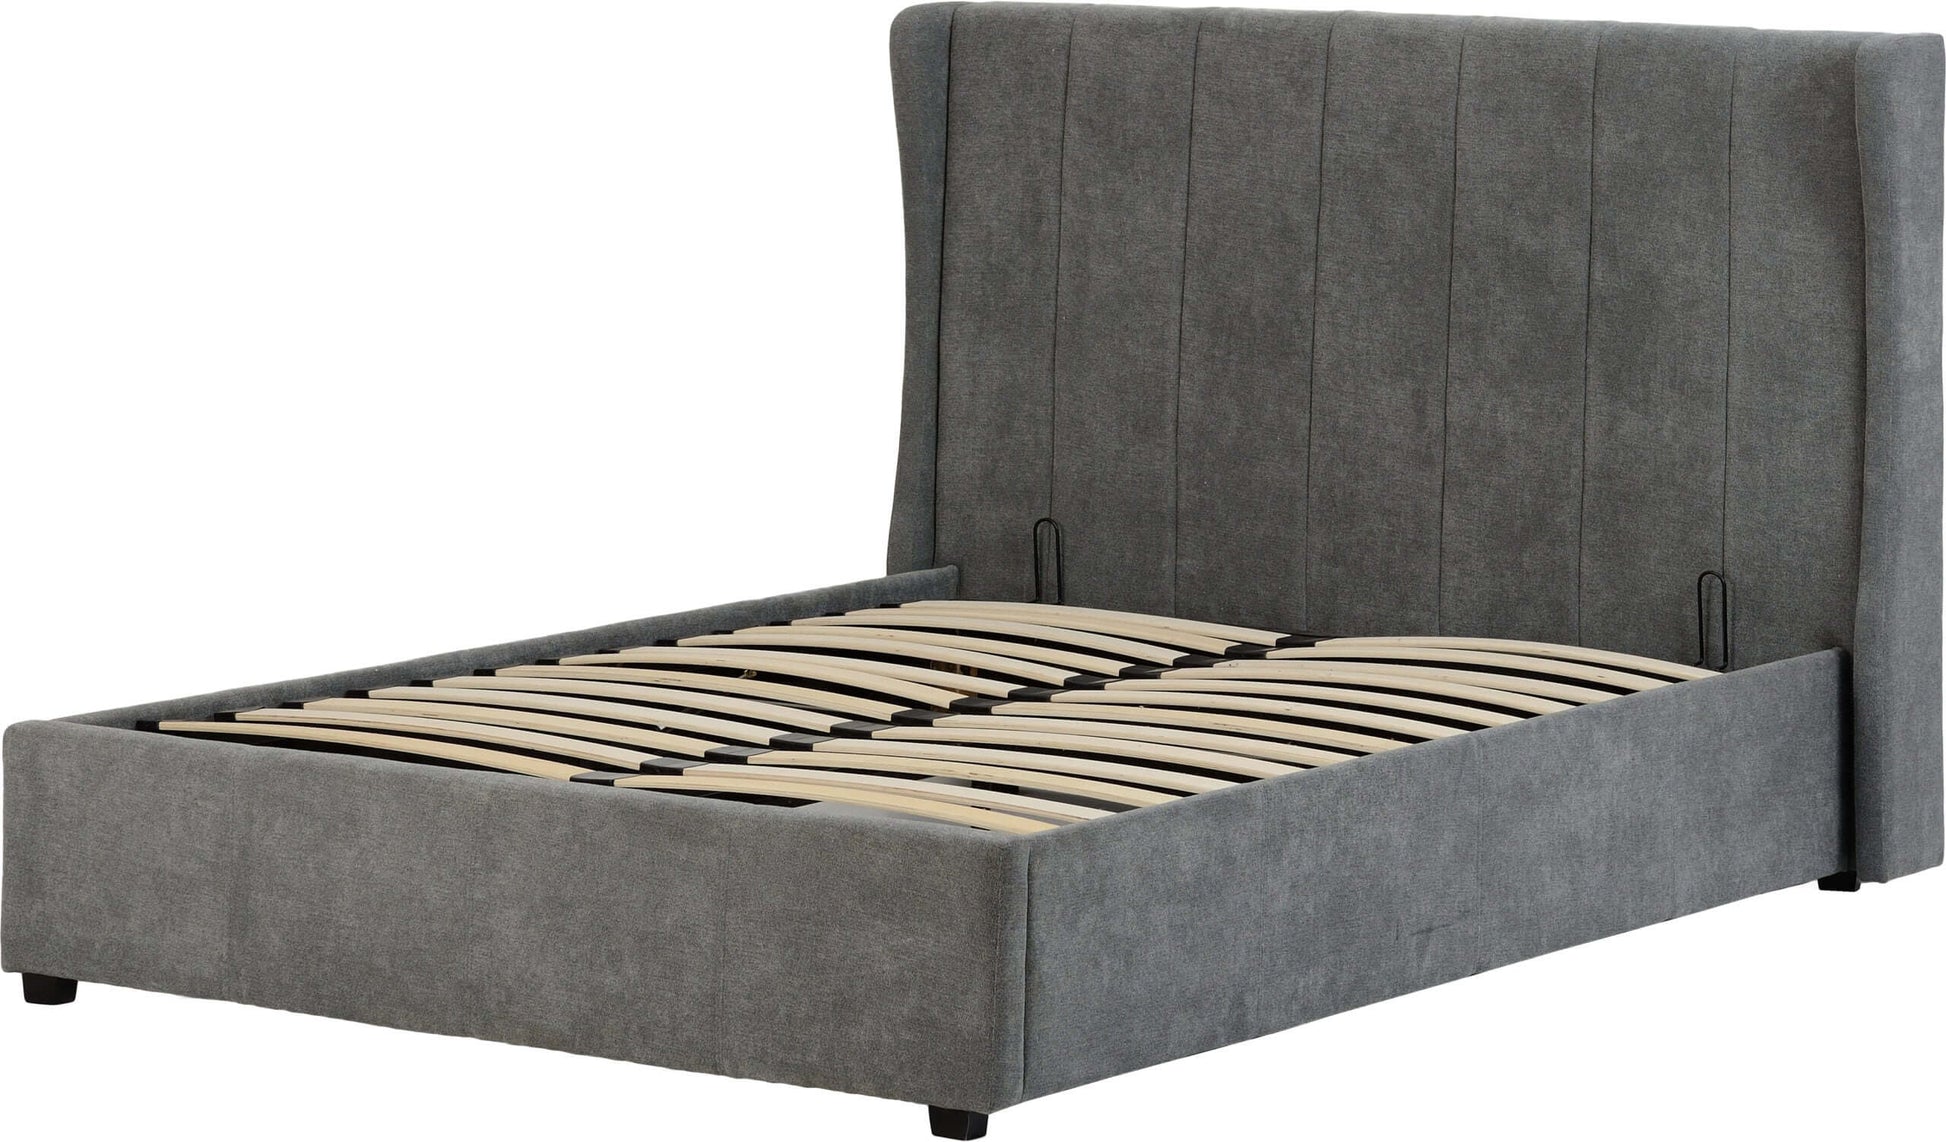 Amelia Plus 5' Storage King Bed - Dark Grey Fabric- The Right Buy Store